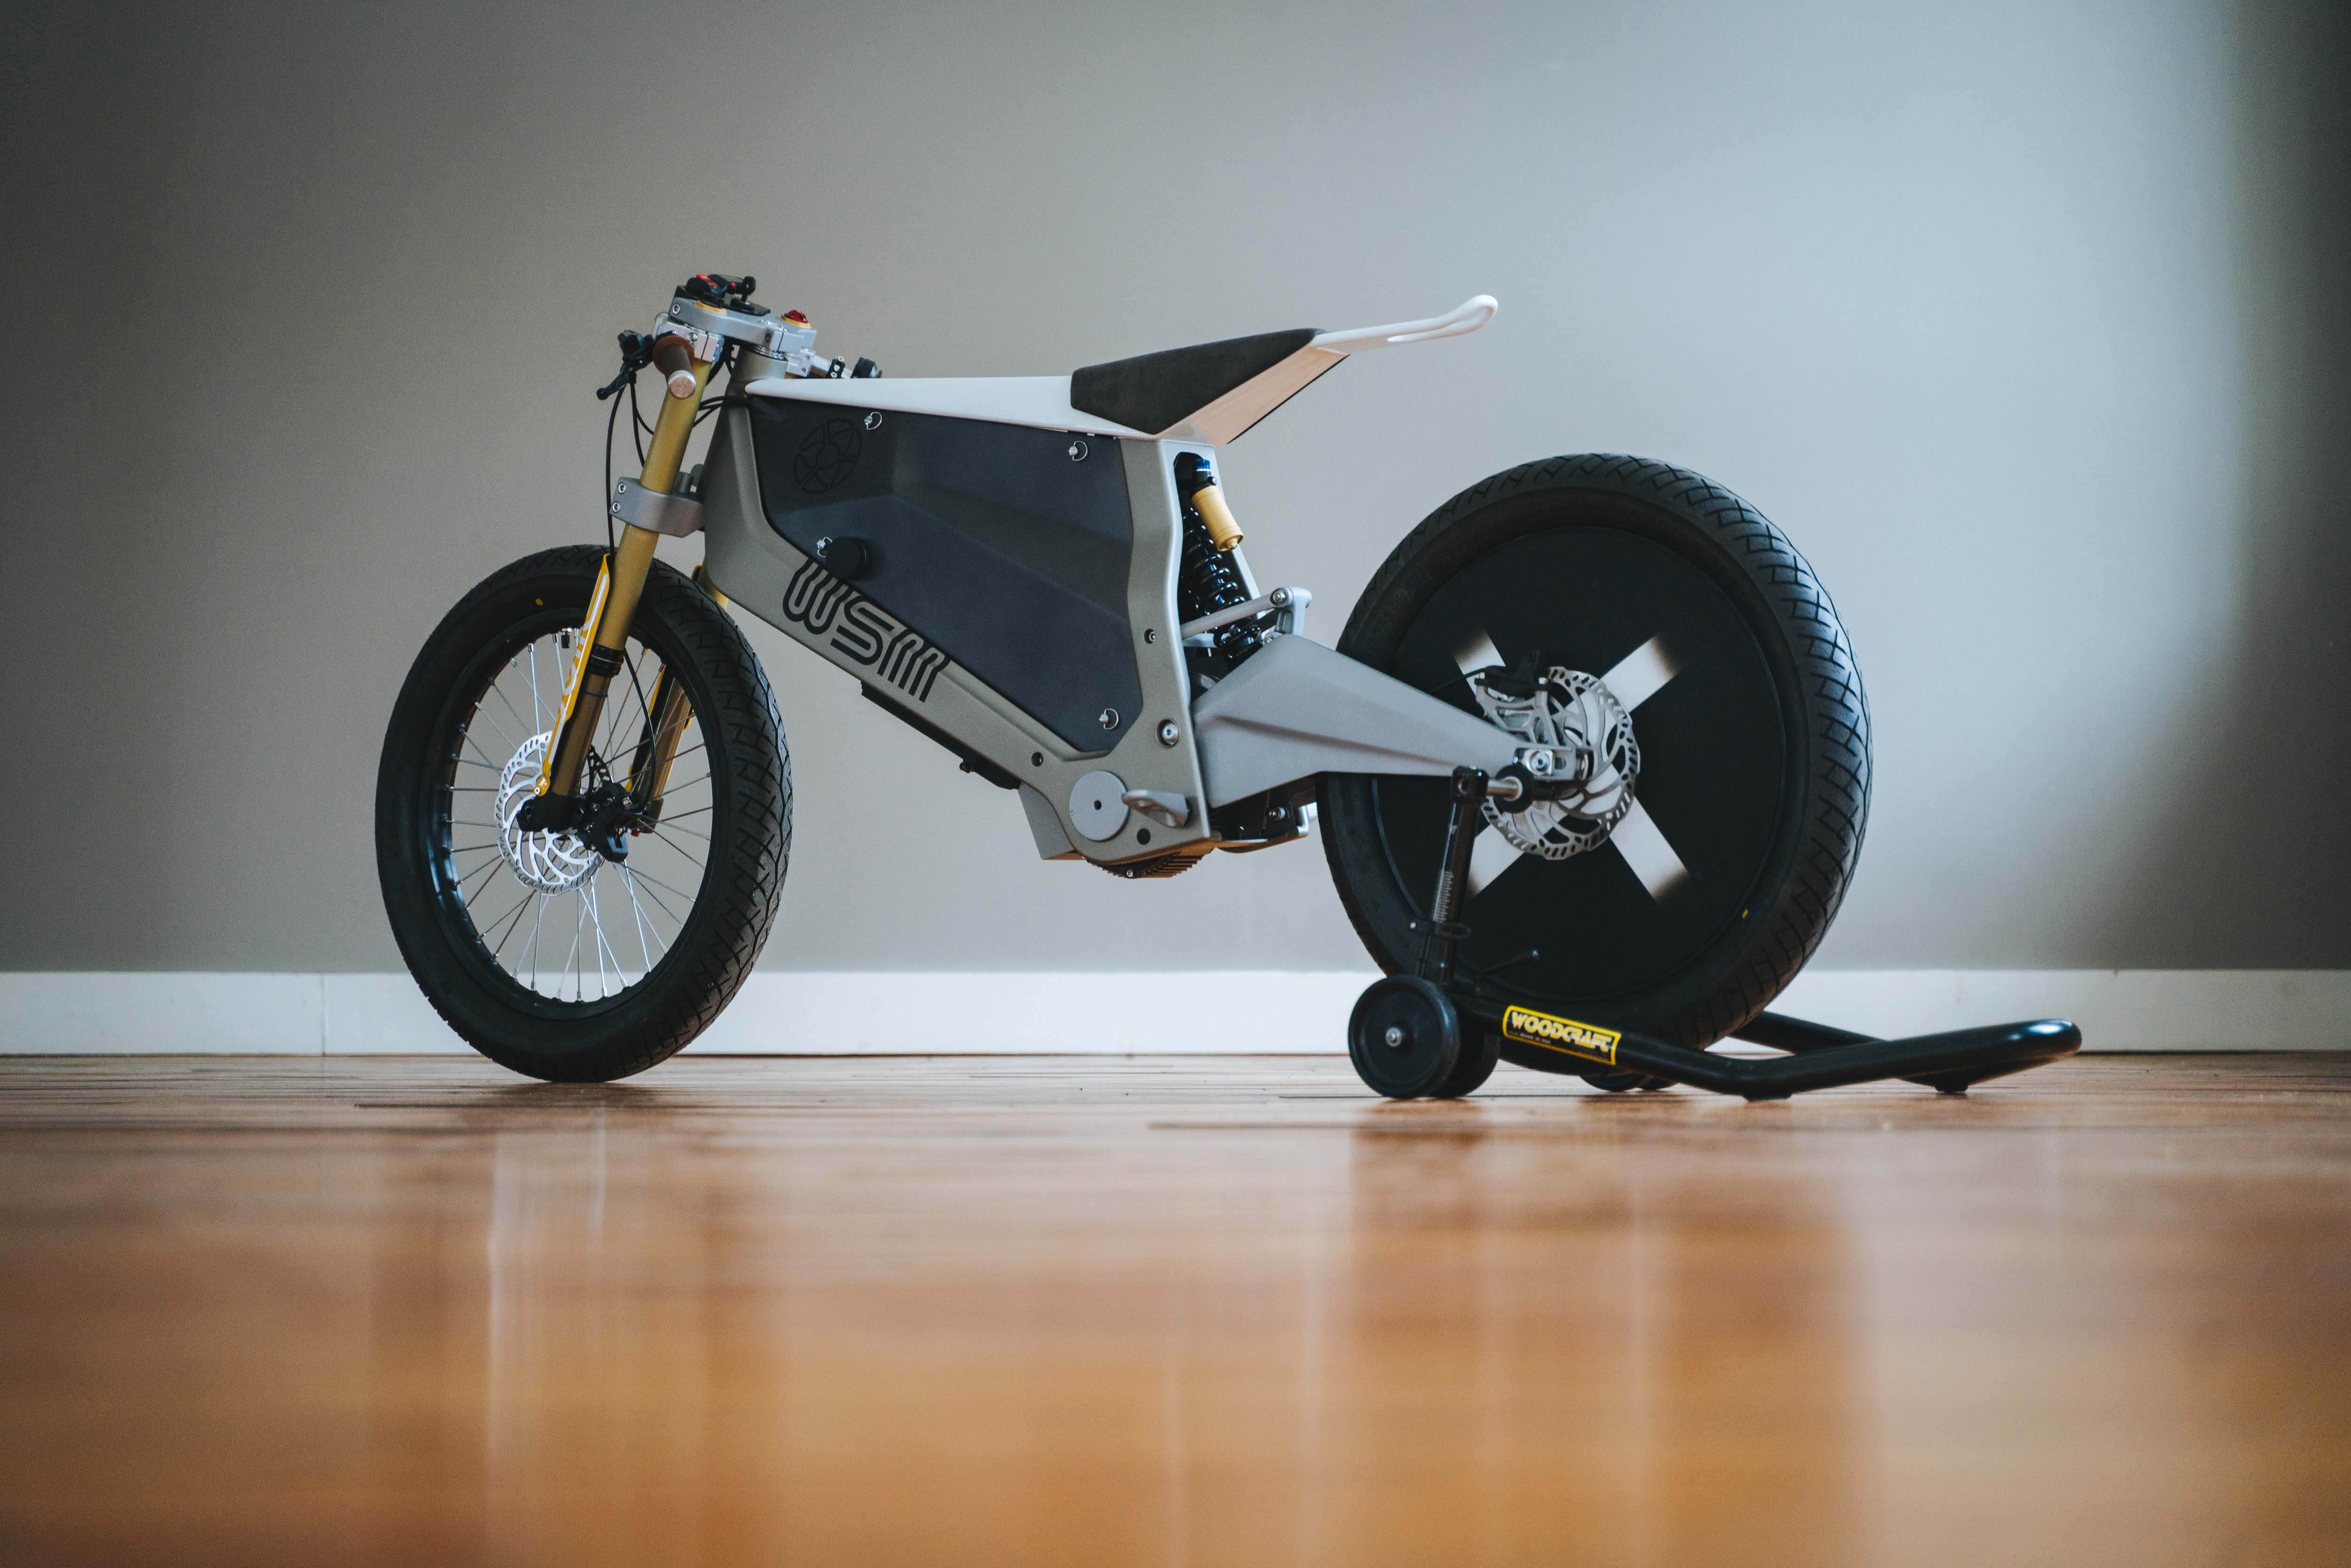 This Electric Motorcycle Truly Redefines The Way We Look At Electrics